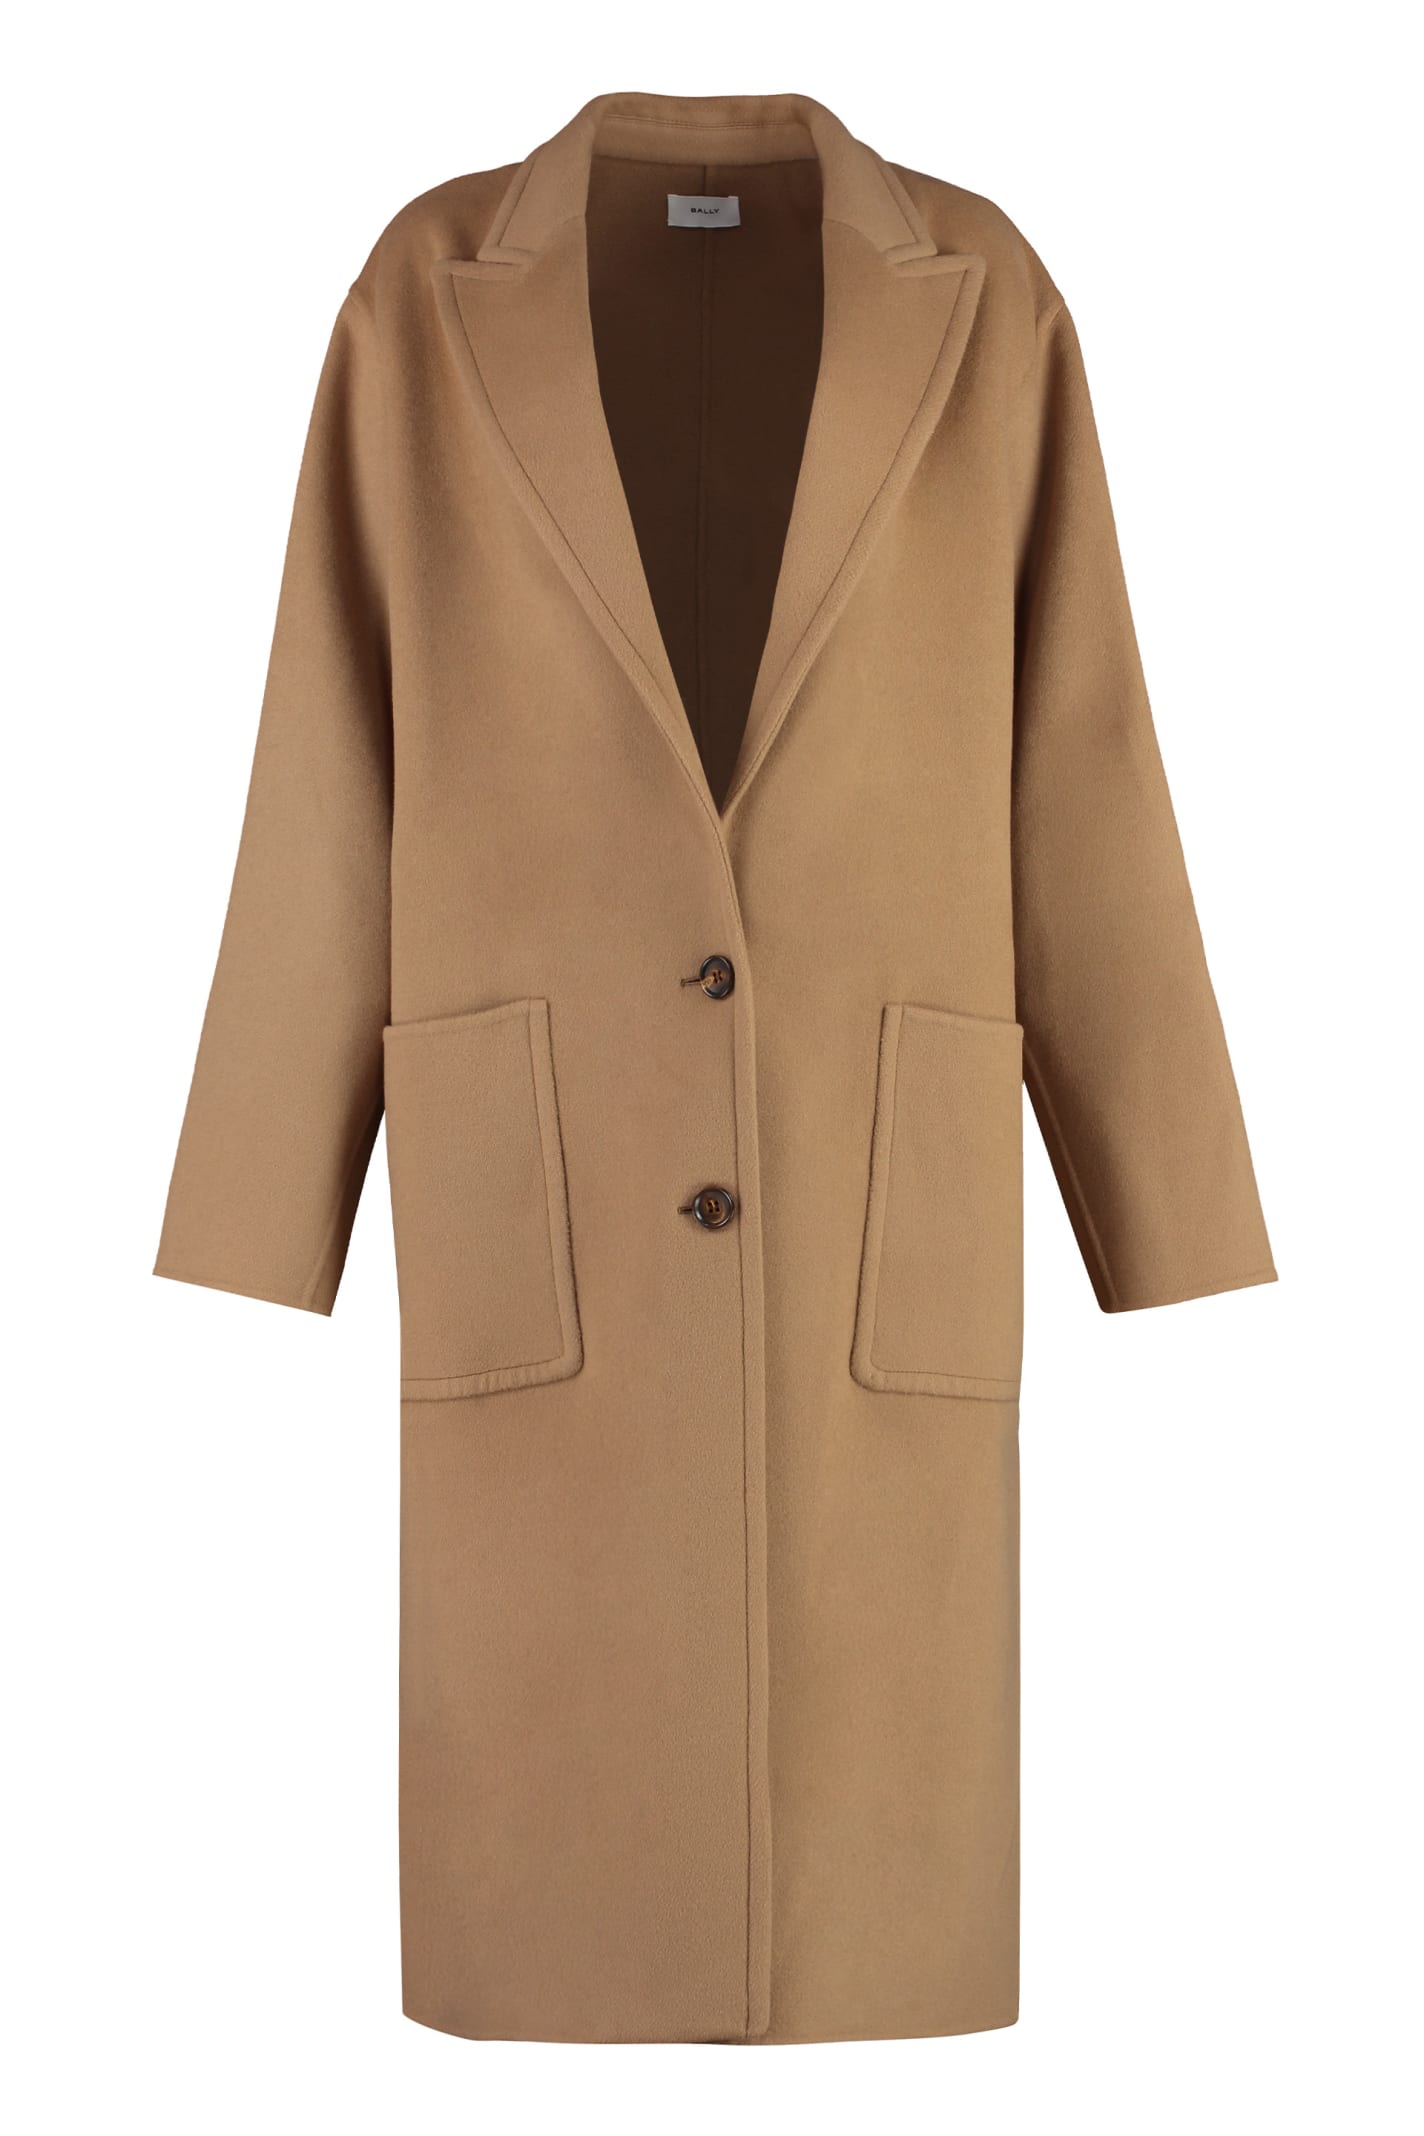 Bally Wool And Cashmere Coat